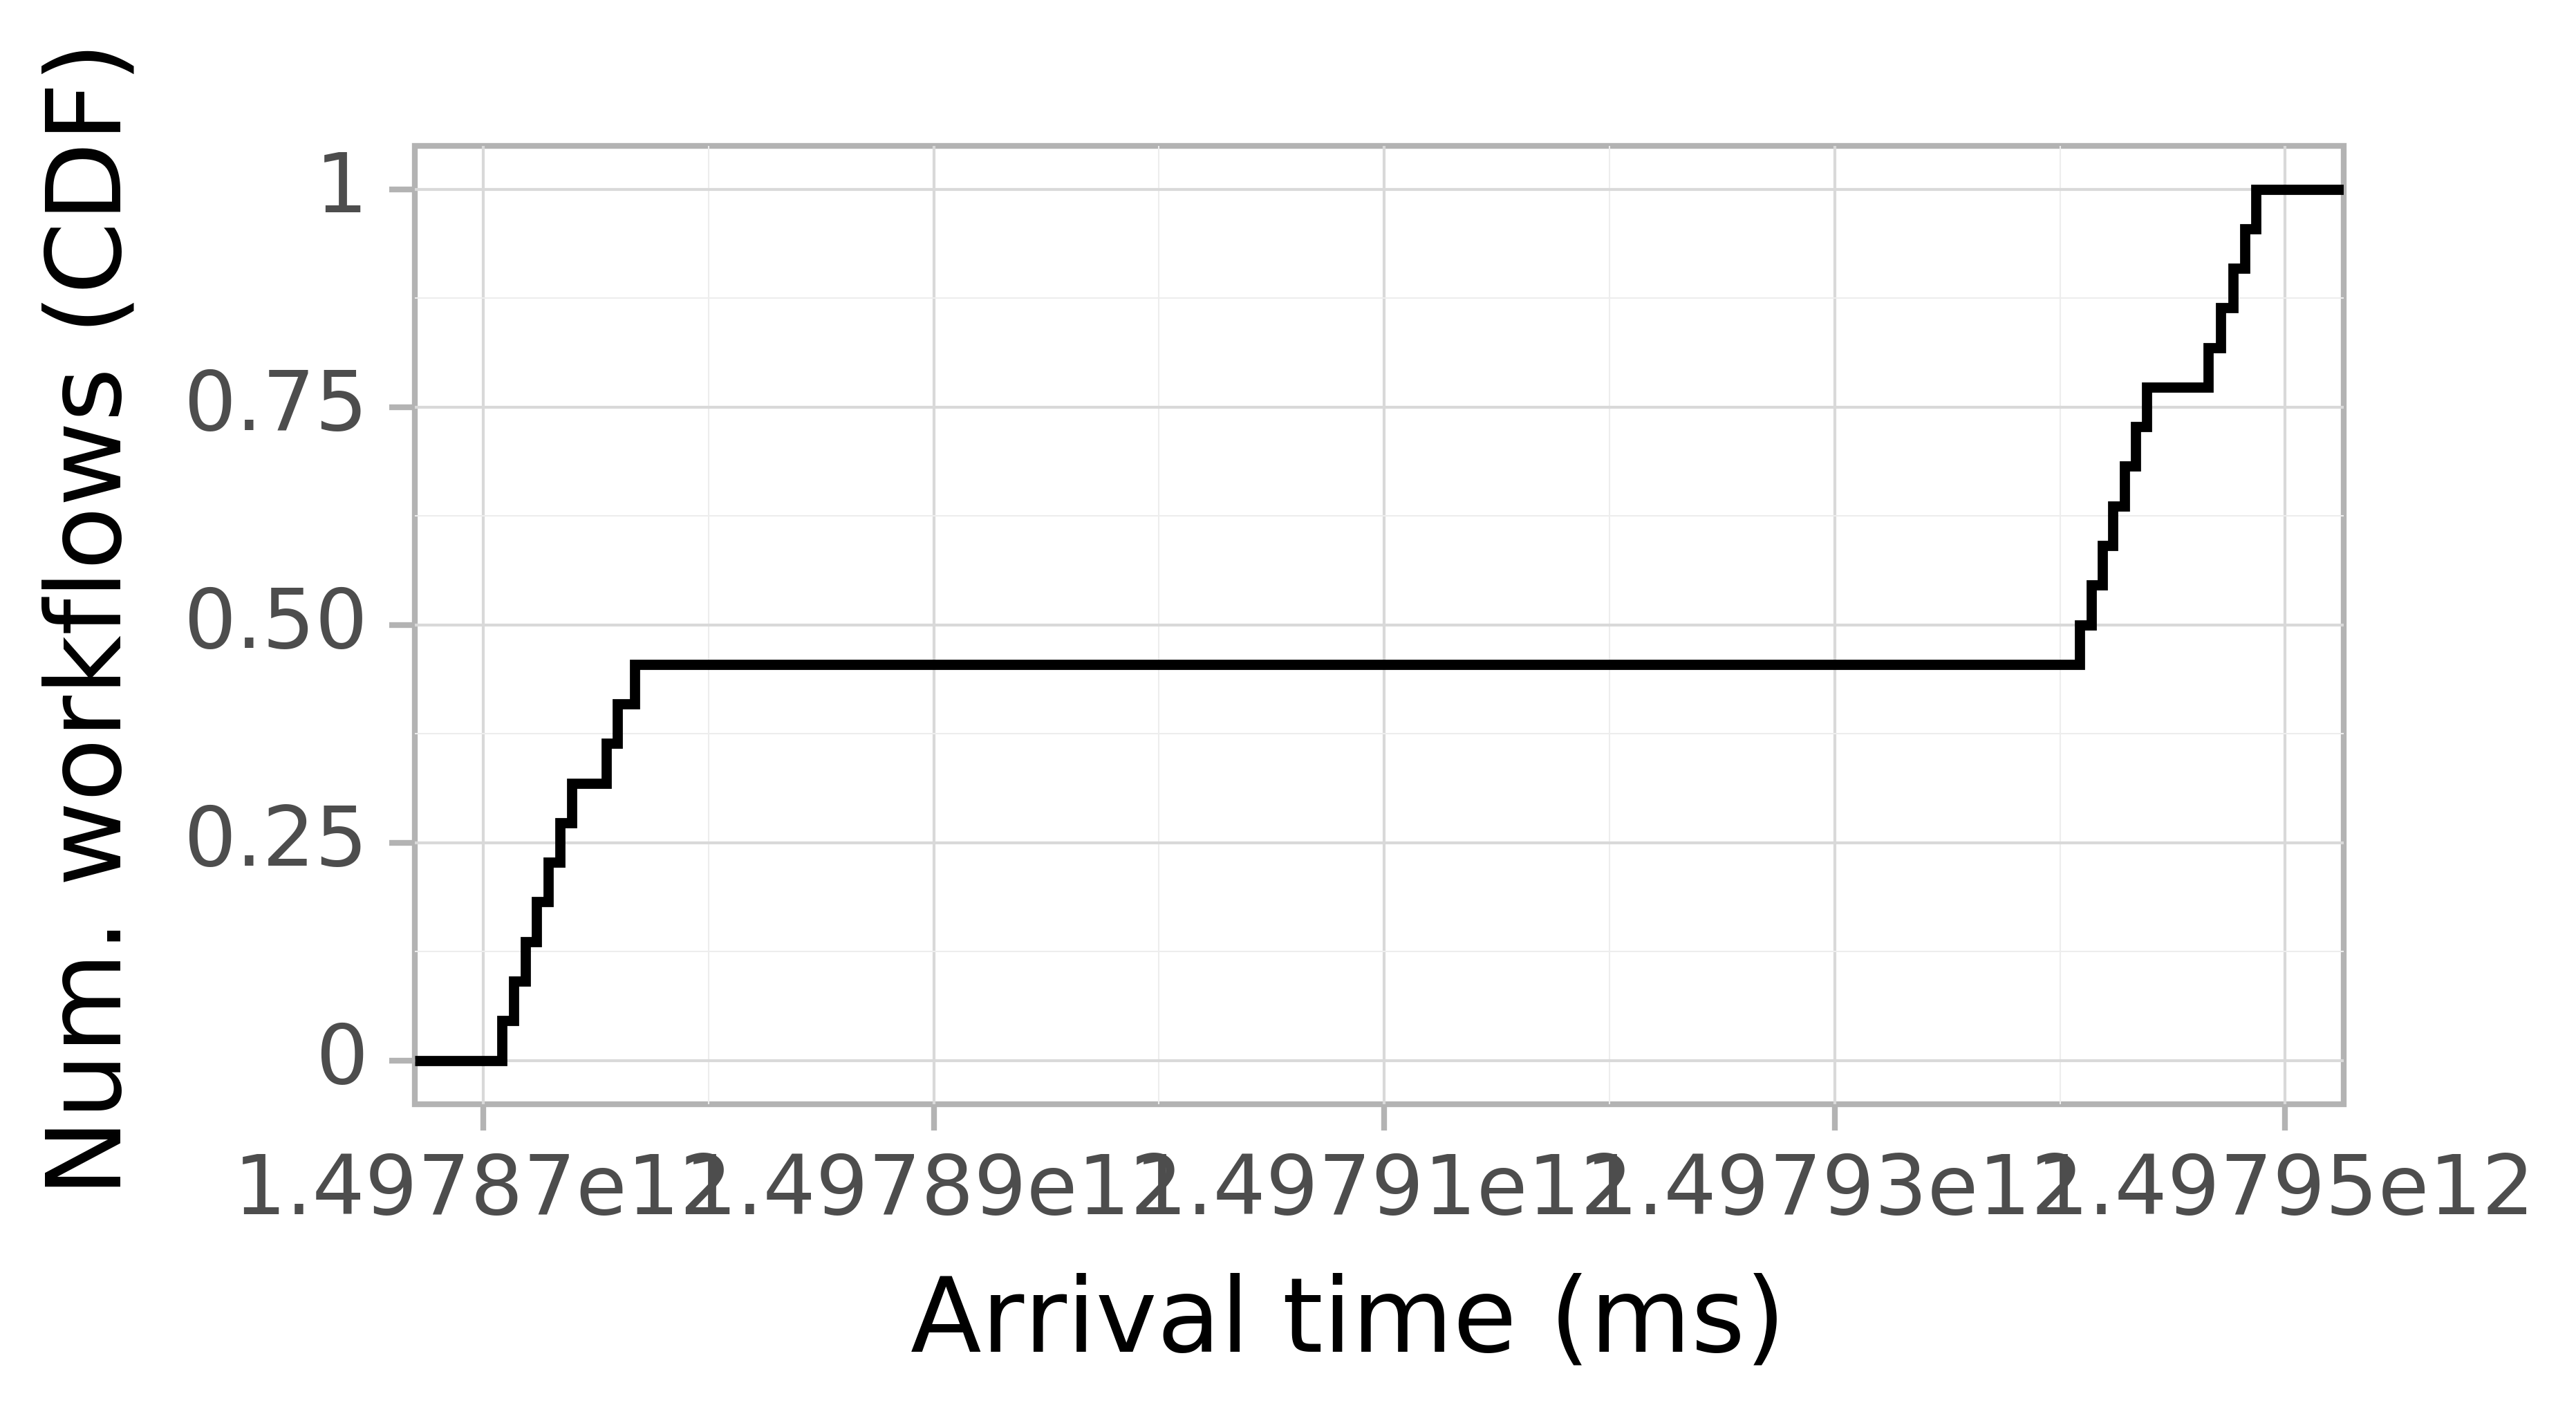 Job arrival CDF graph for the askalon-new_ee26 trace.